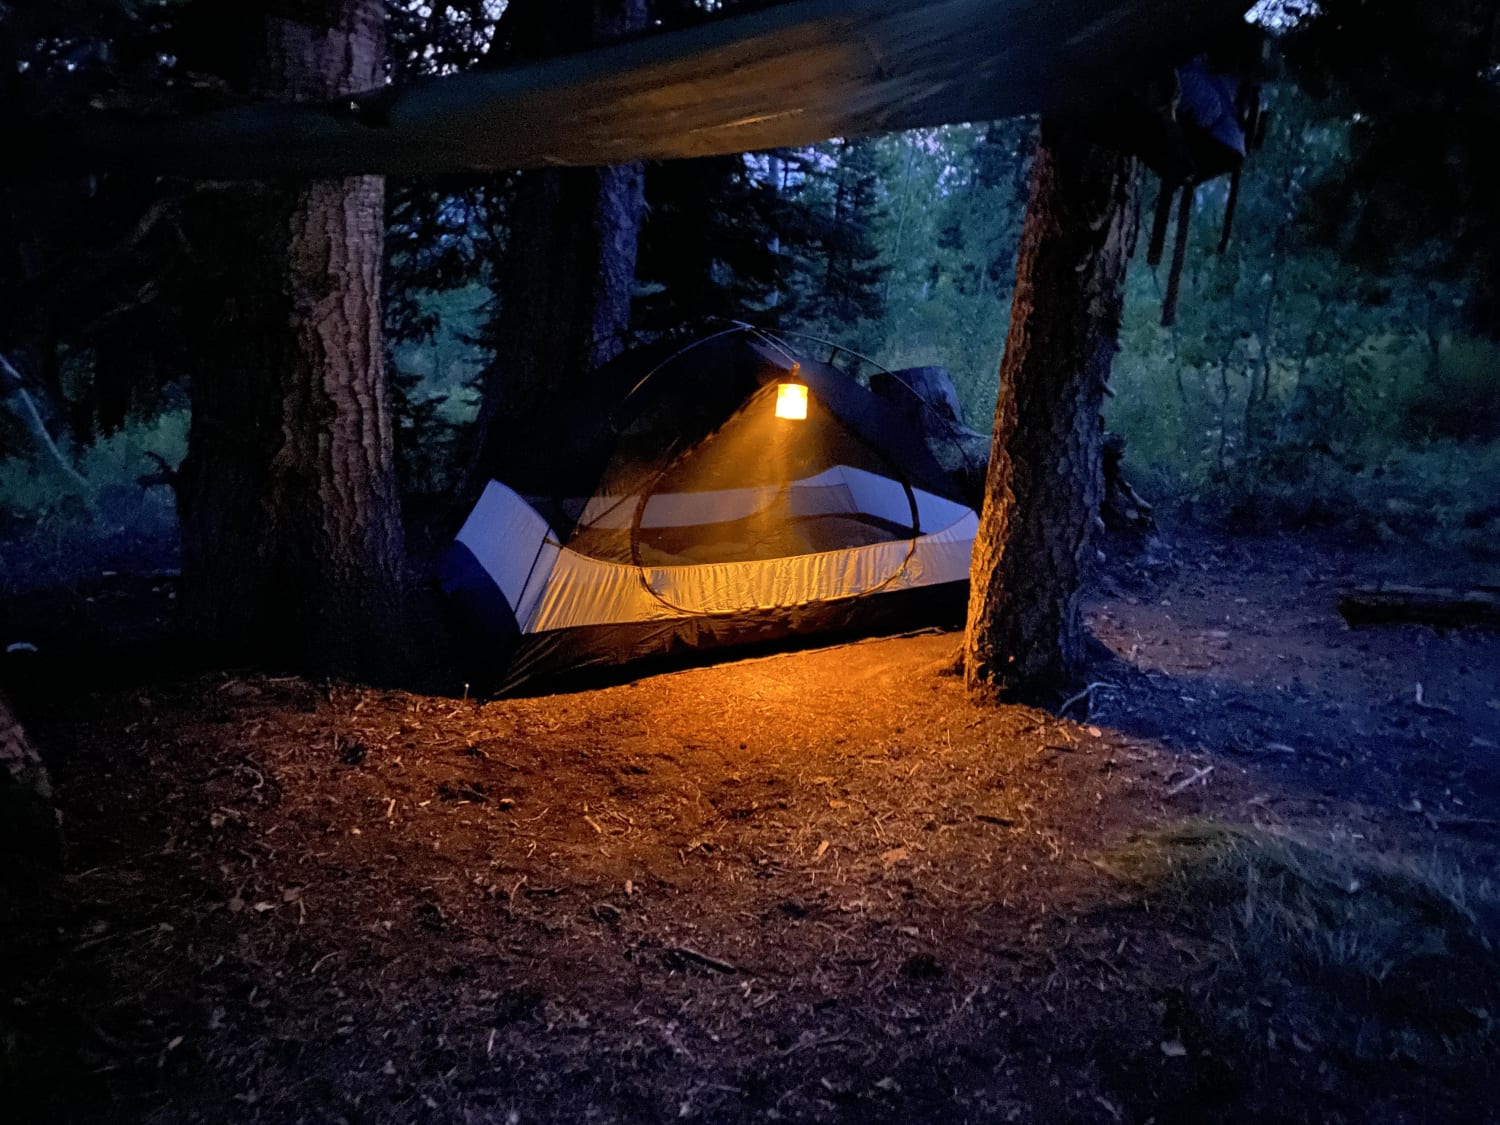 A tent in the Rocky Mountains in which I am currently nestled with down blankets. (I conveniently have cell service).